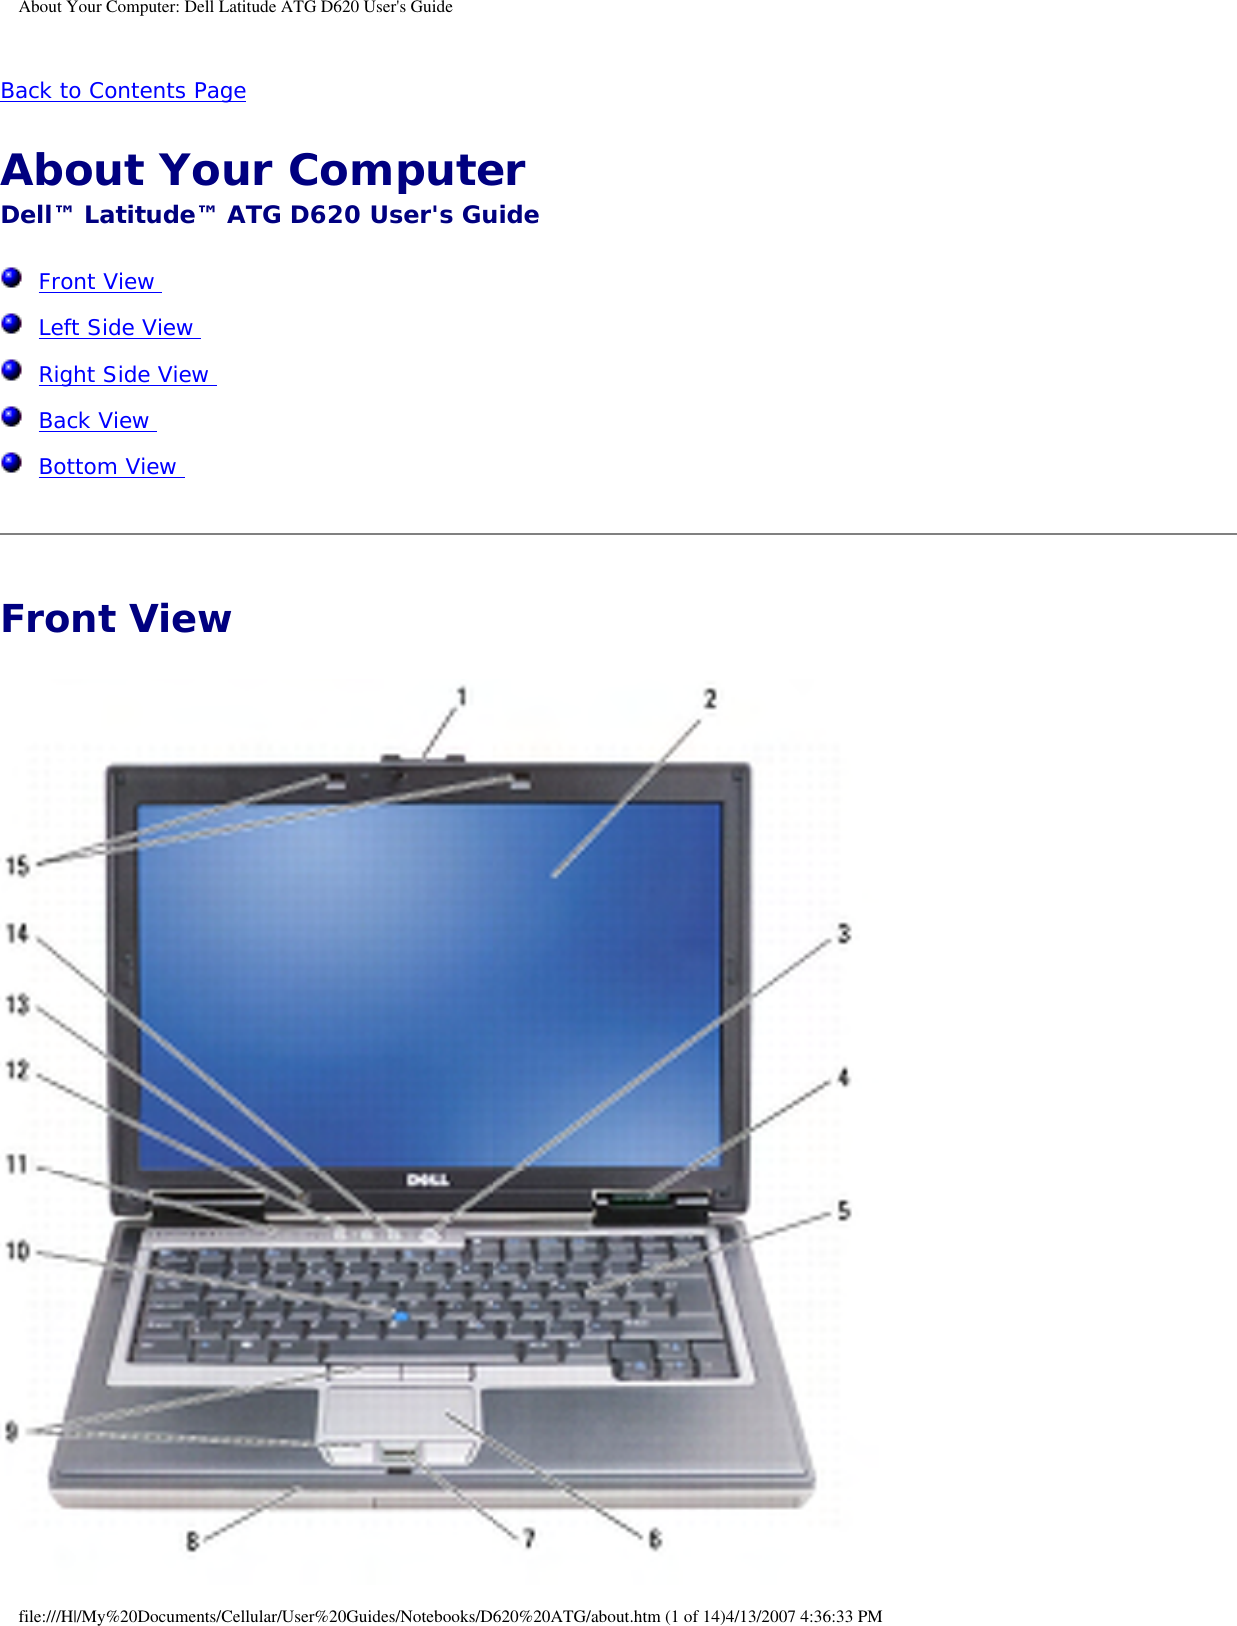 About Your Computer: Dell Latitude ATG D620 User&apos;s GuideBack to Contents Page About Your Computer Dell™ Latitude™ ATG D620 User&apos;s Guide  Front View   Left Side View   Right Side View   Back View   Bottom View  Front View file:///H|/My%20Documents/Cellular/User%20Guides/Notebooks/D620%20ATG/about.htm (1 of 14)4/13/2007 4:36:33 PM